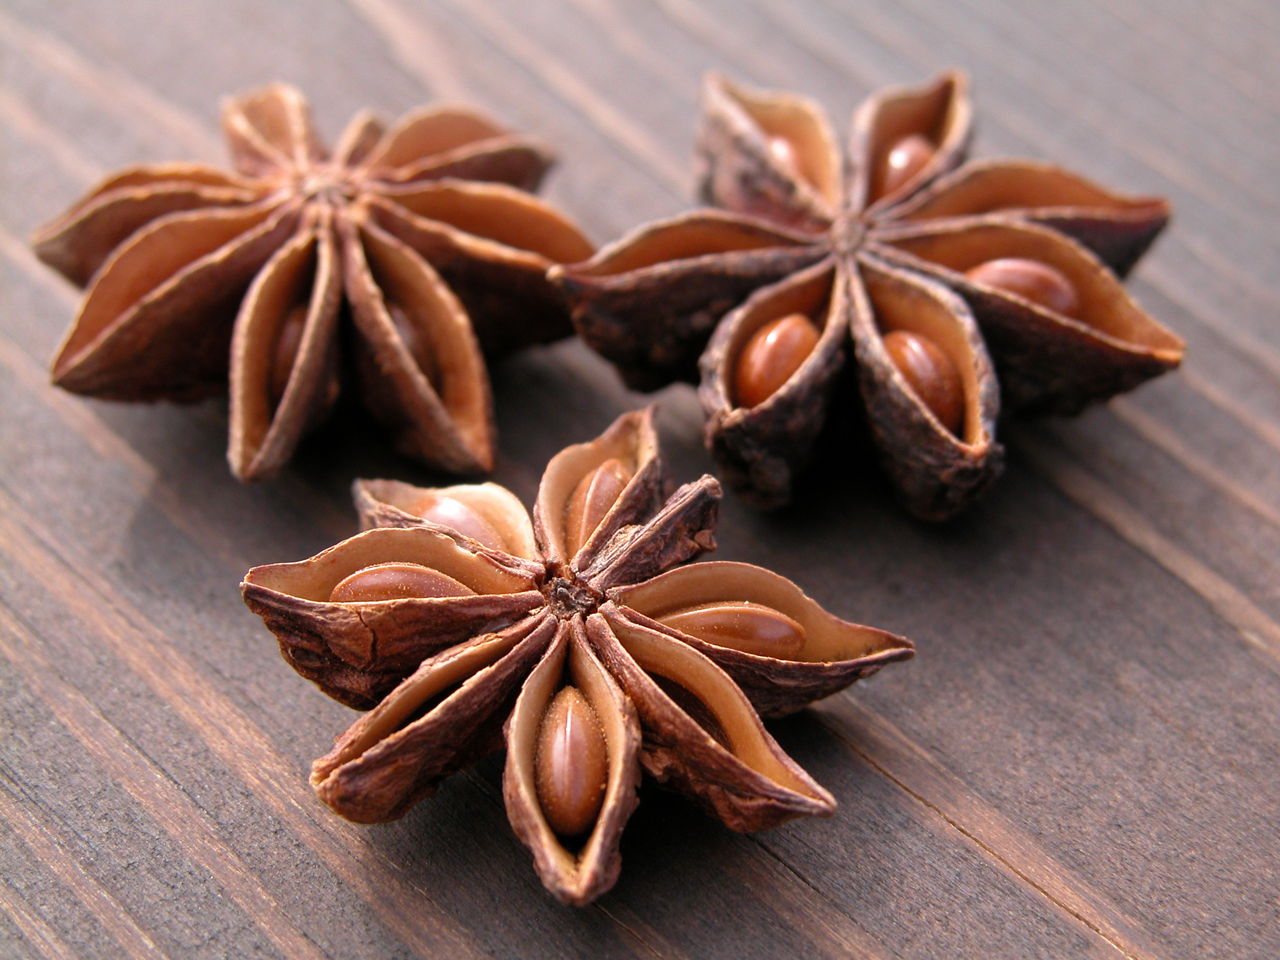 Anise Seed Substitutes